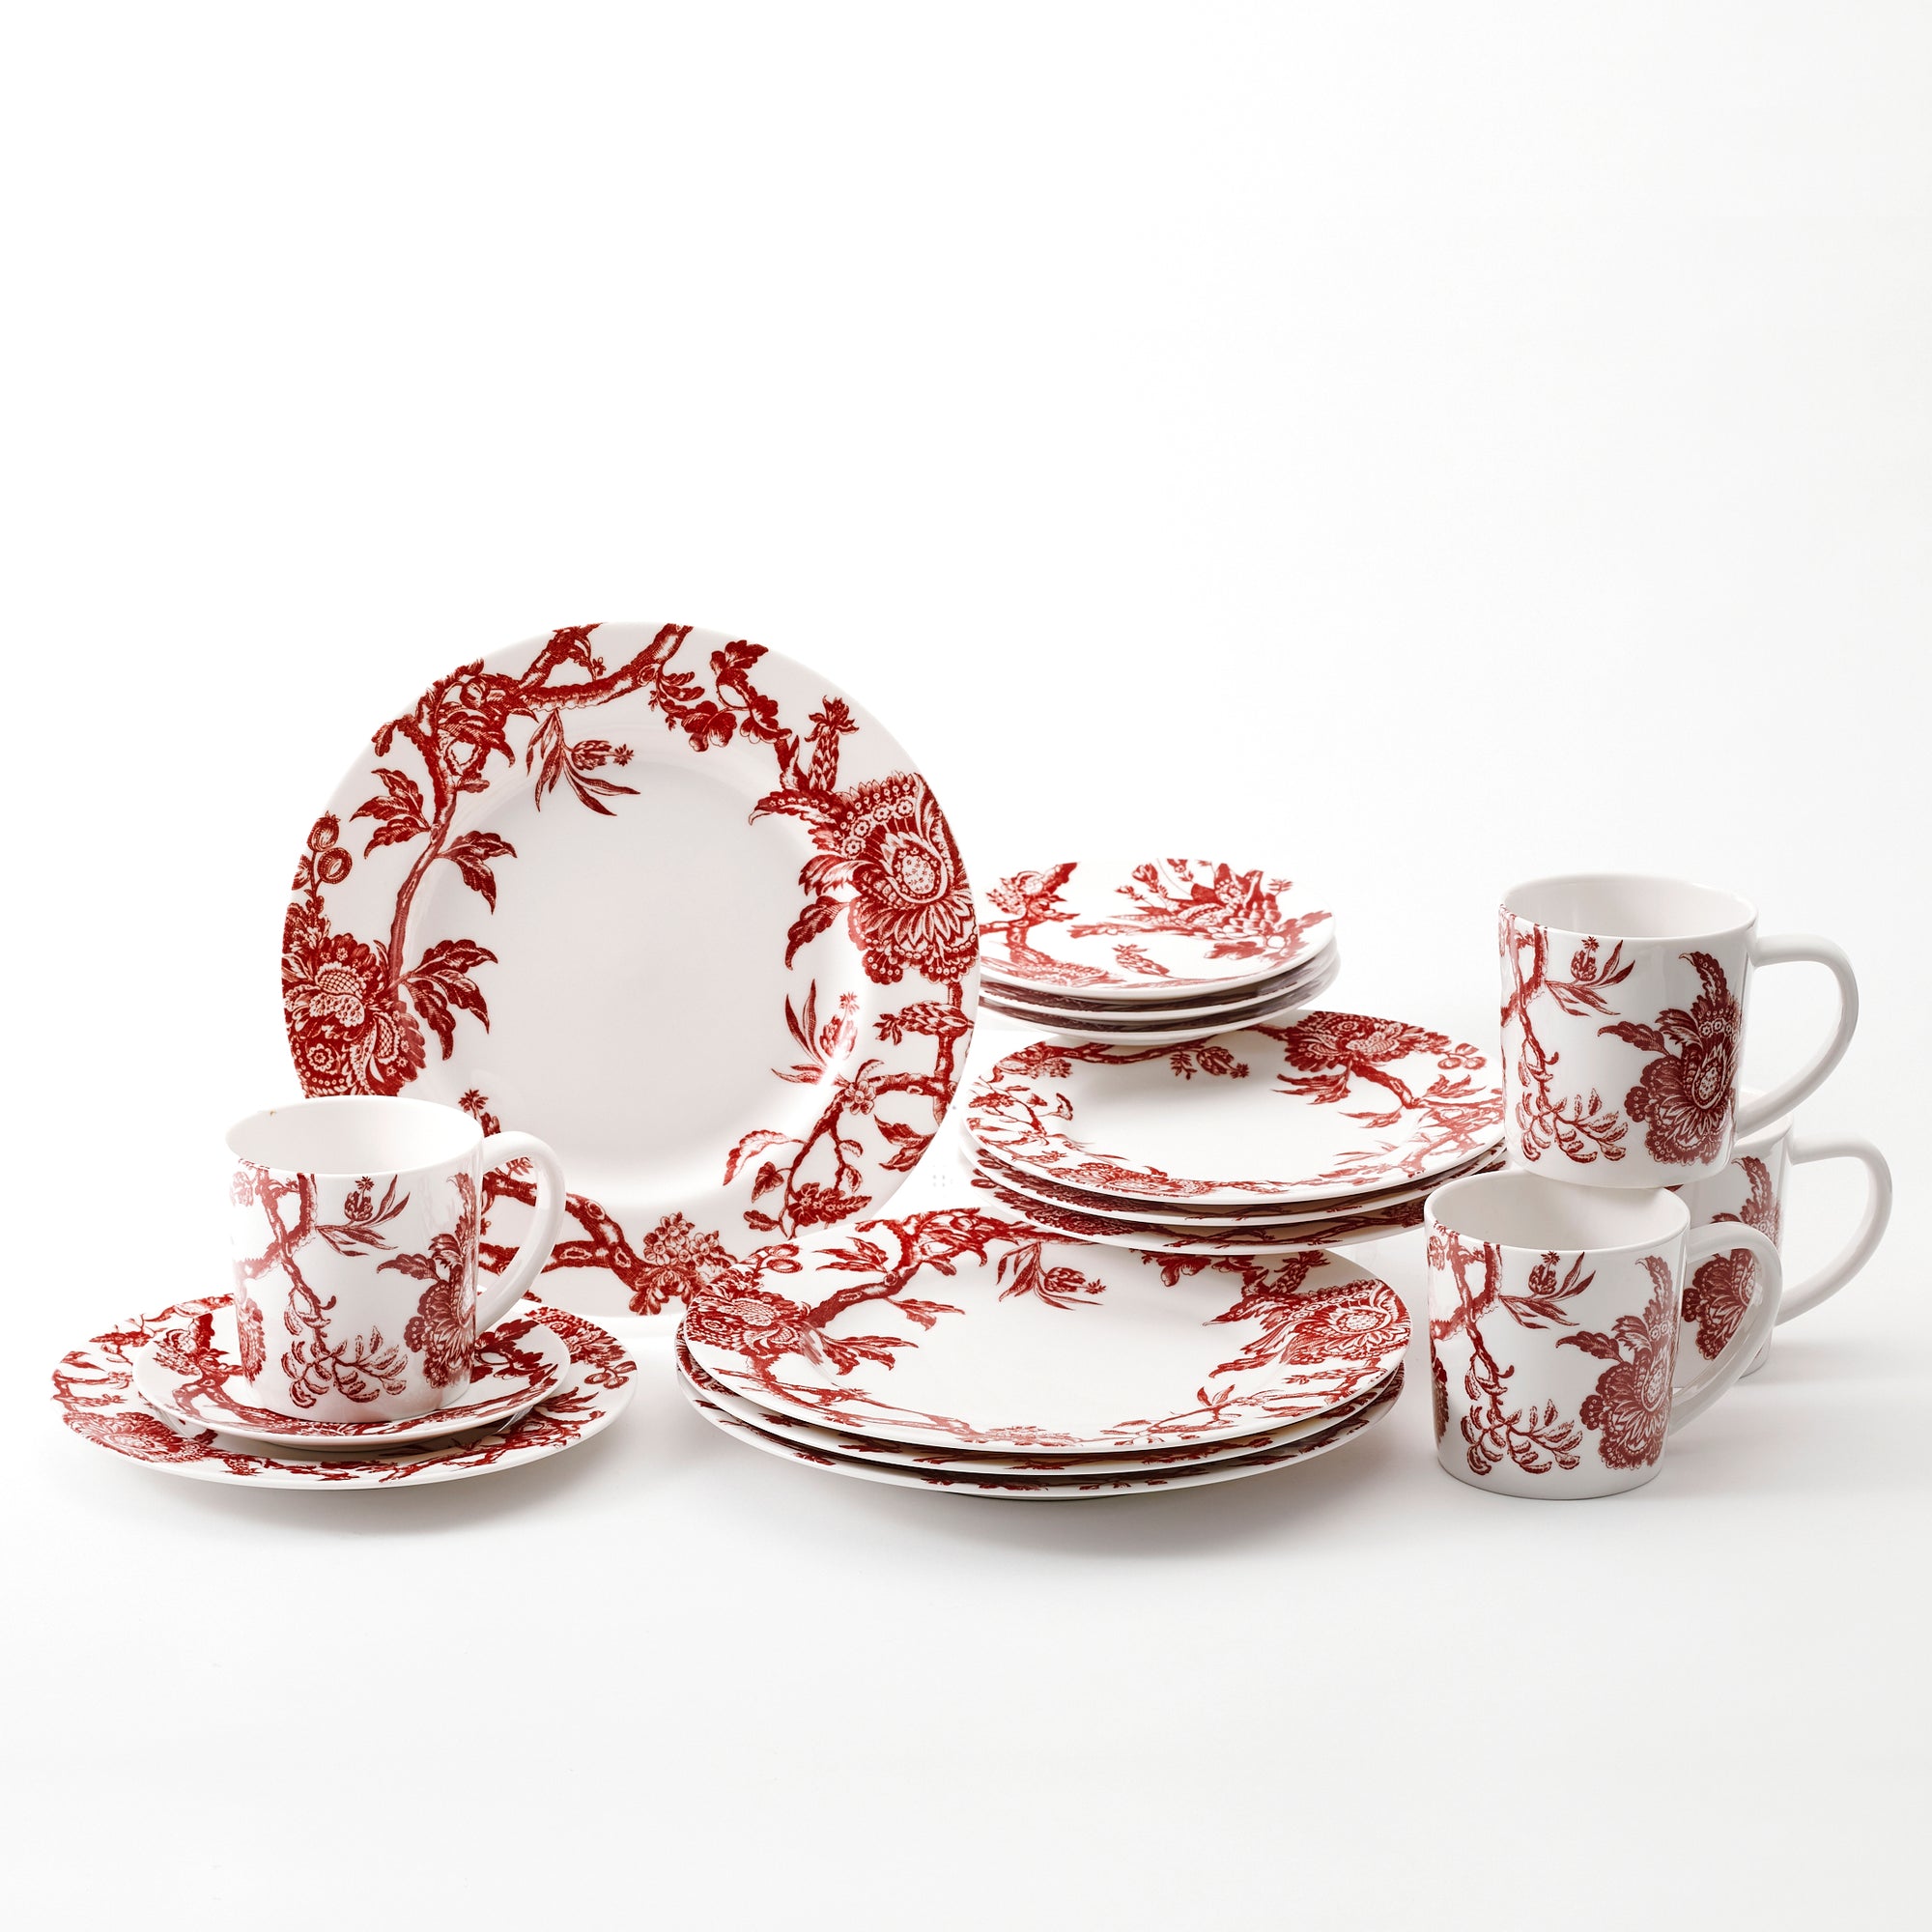 Arcadia Crimson 16 Piece dinnerware Set for 4 in high-fired porcelain from Caskata. Set includes 4 dinner plates, 4 salad plates, 4 canape plates, and 4 mugs.